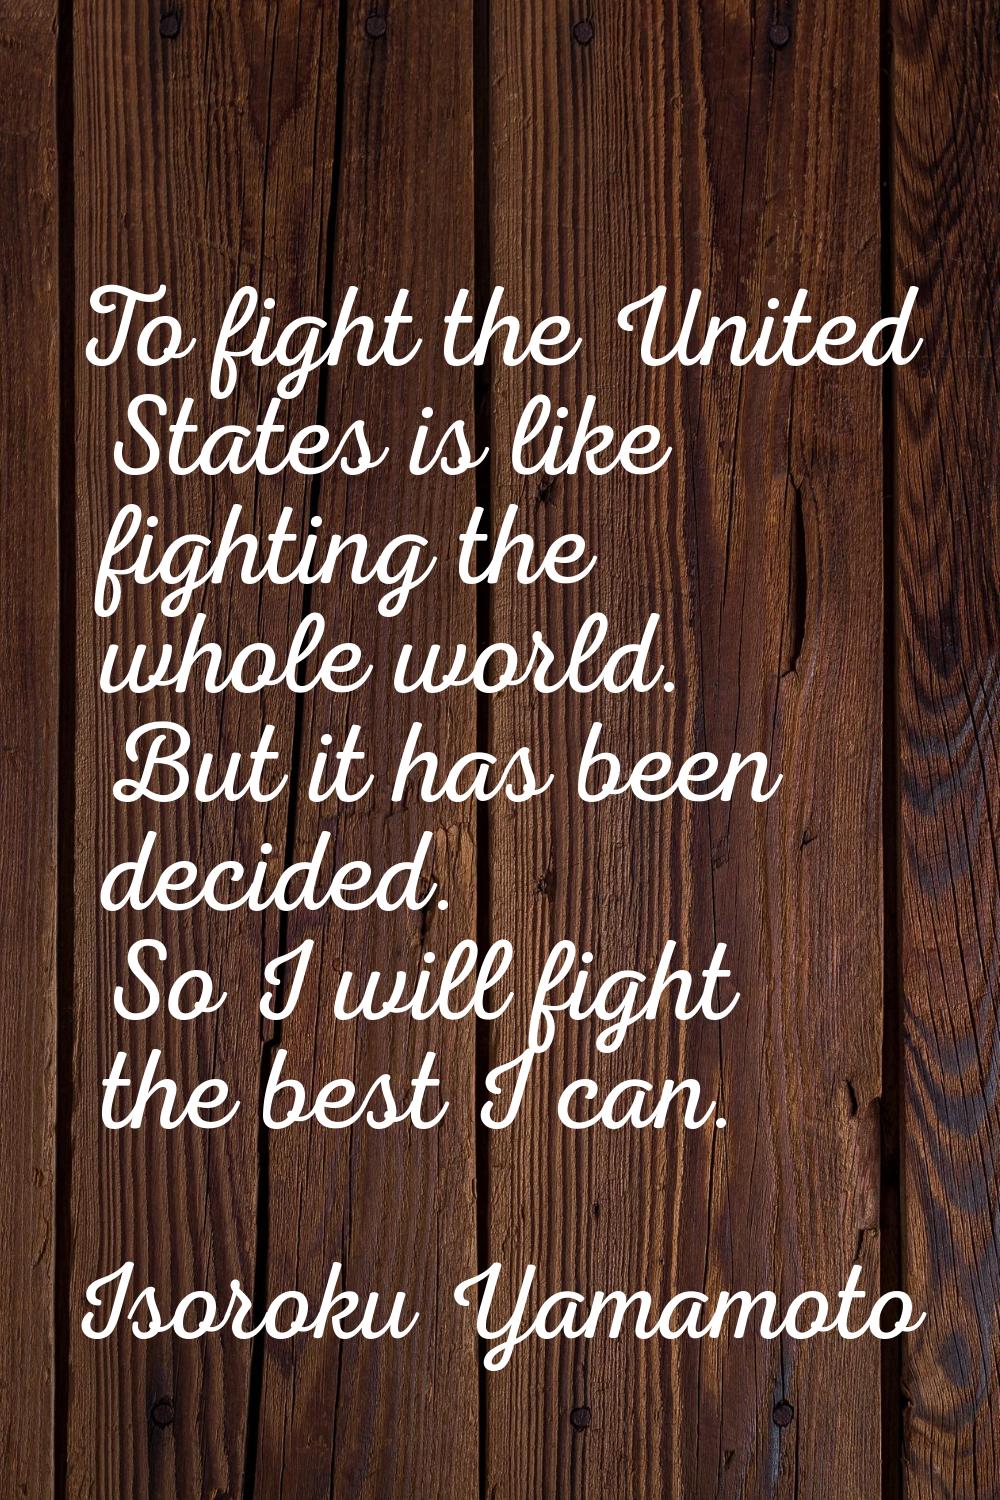 To fight the United States is like fighting the whole world. But it has been decided. So I will fig